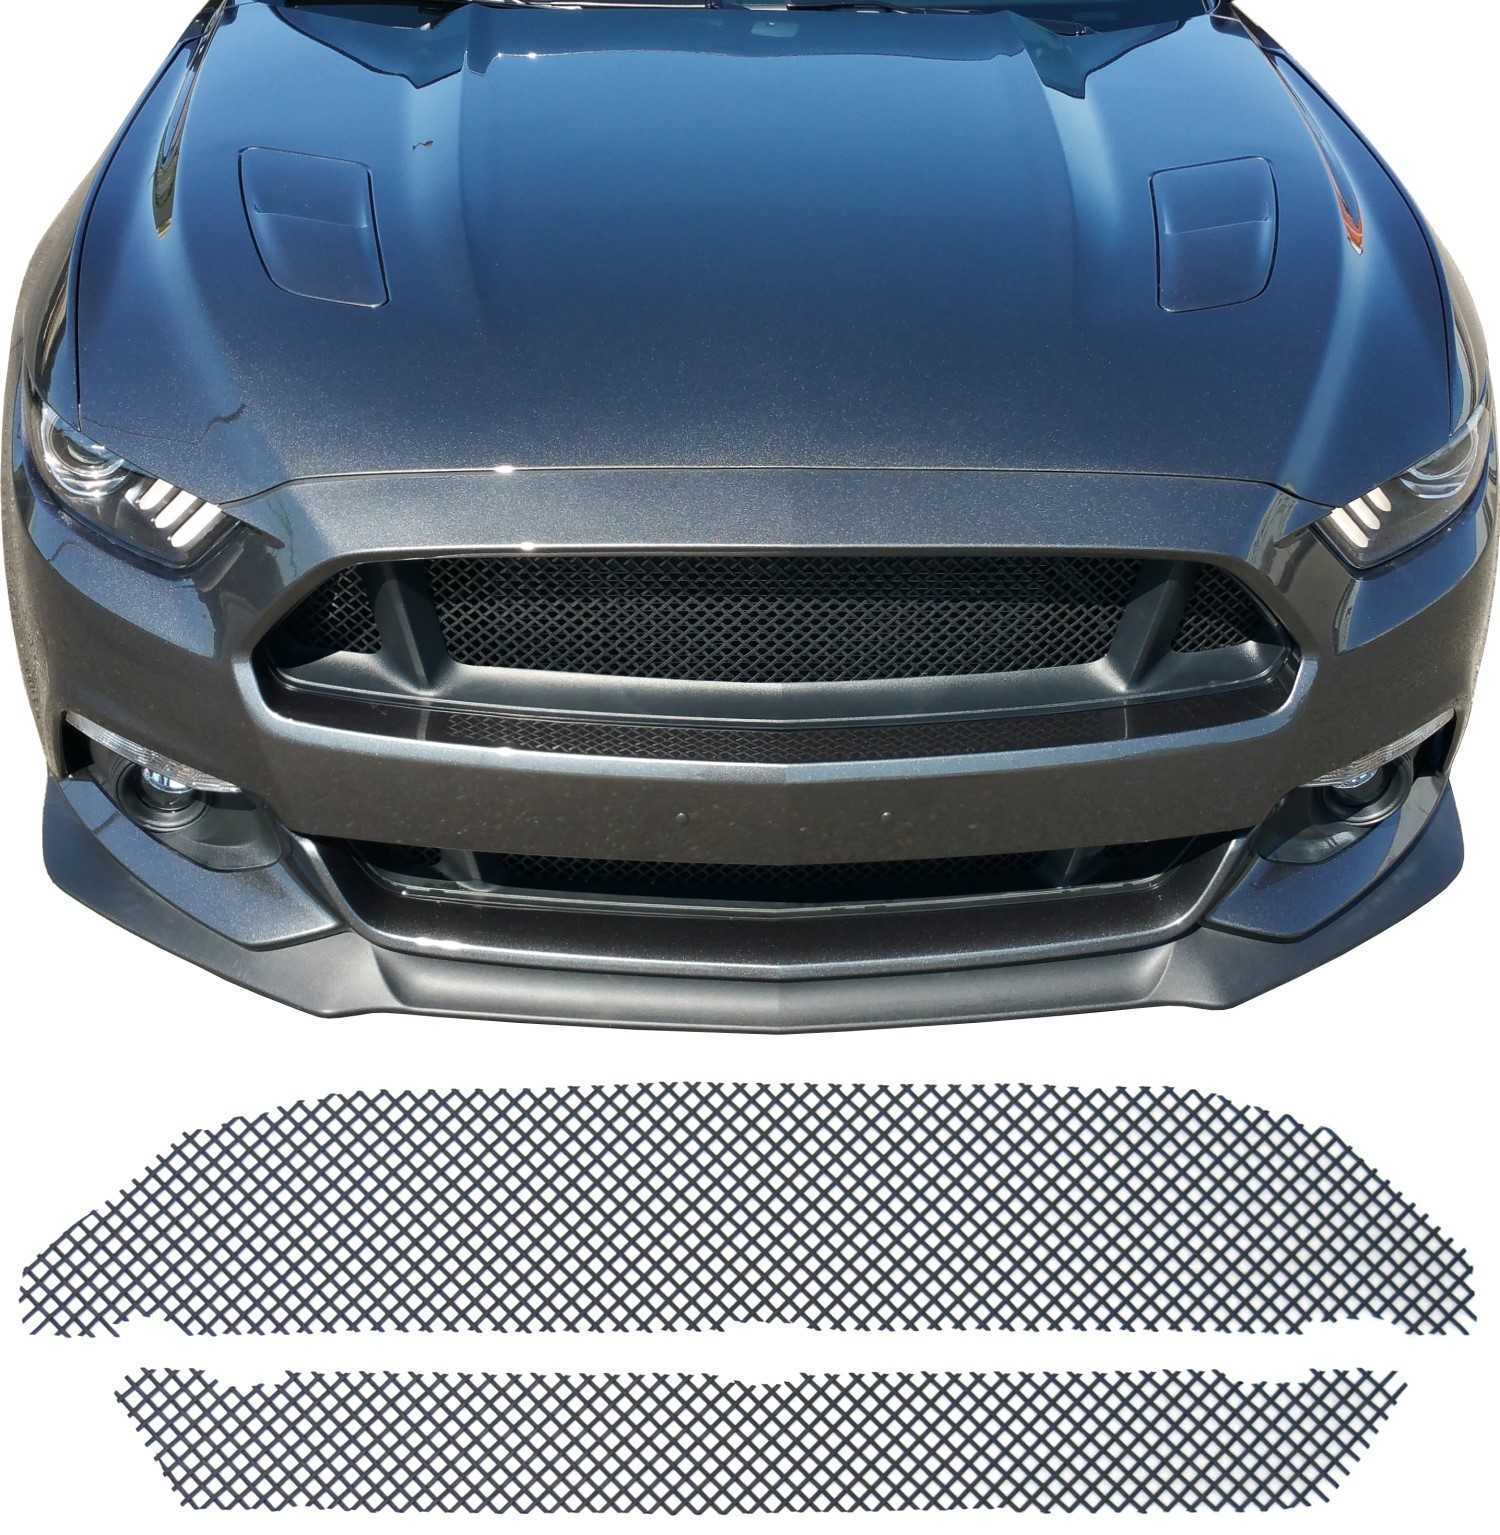 Woven Mesh Grill Kit for 2015 - 2017 Ford Mustang GT